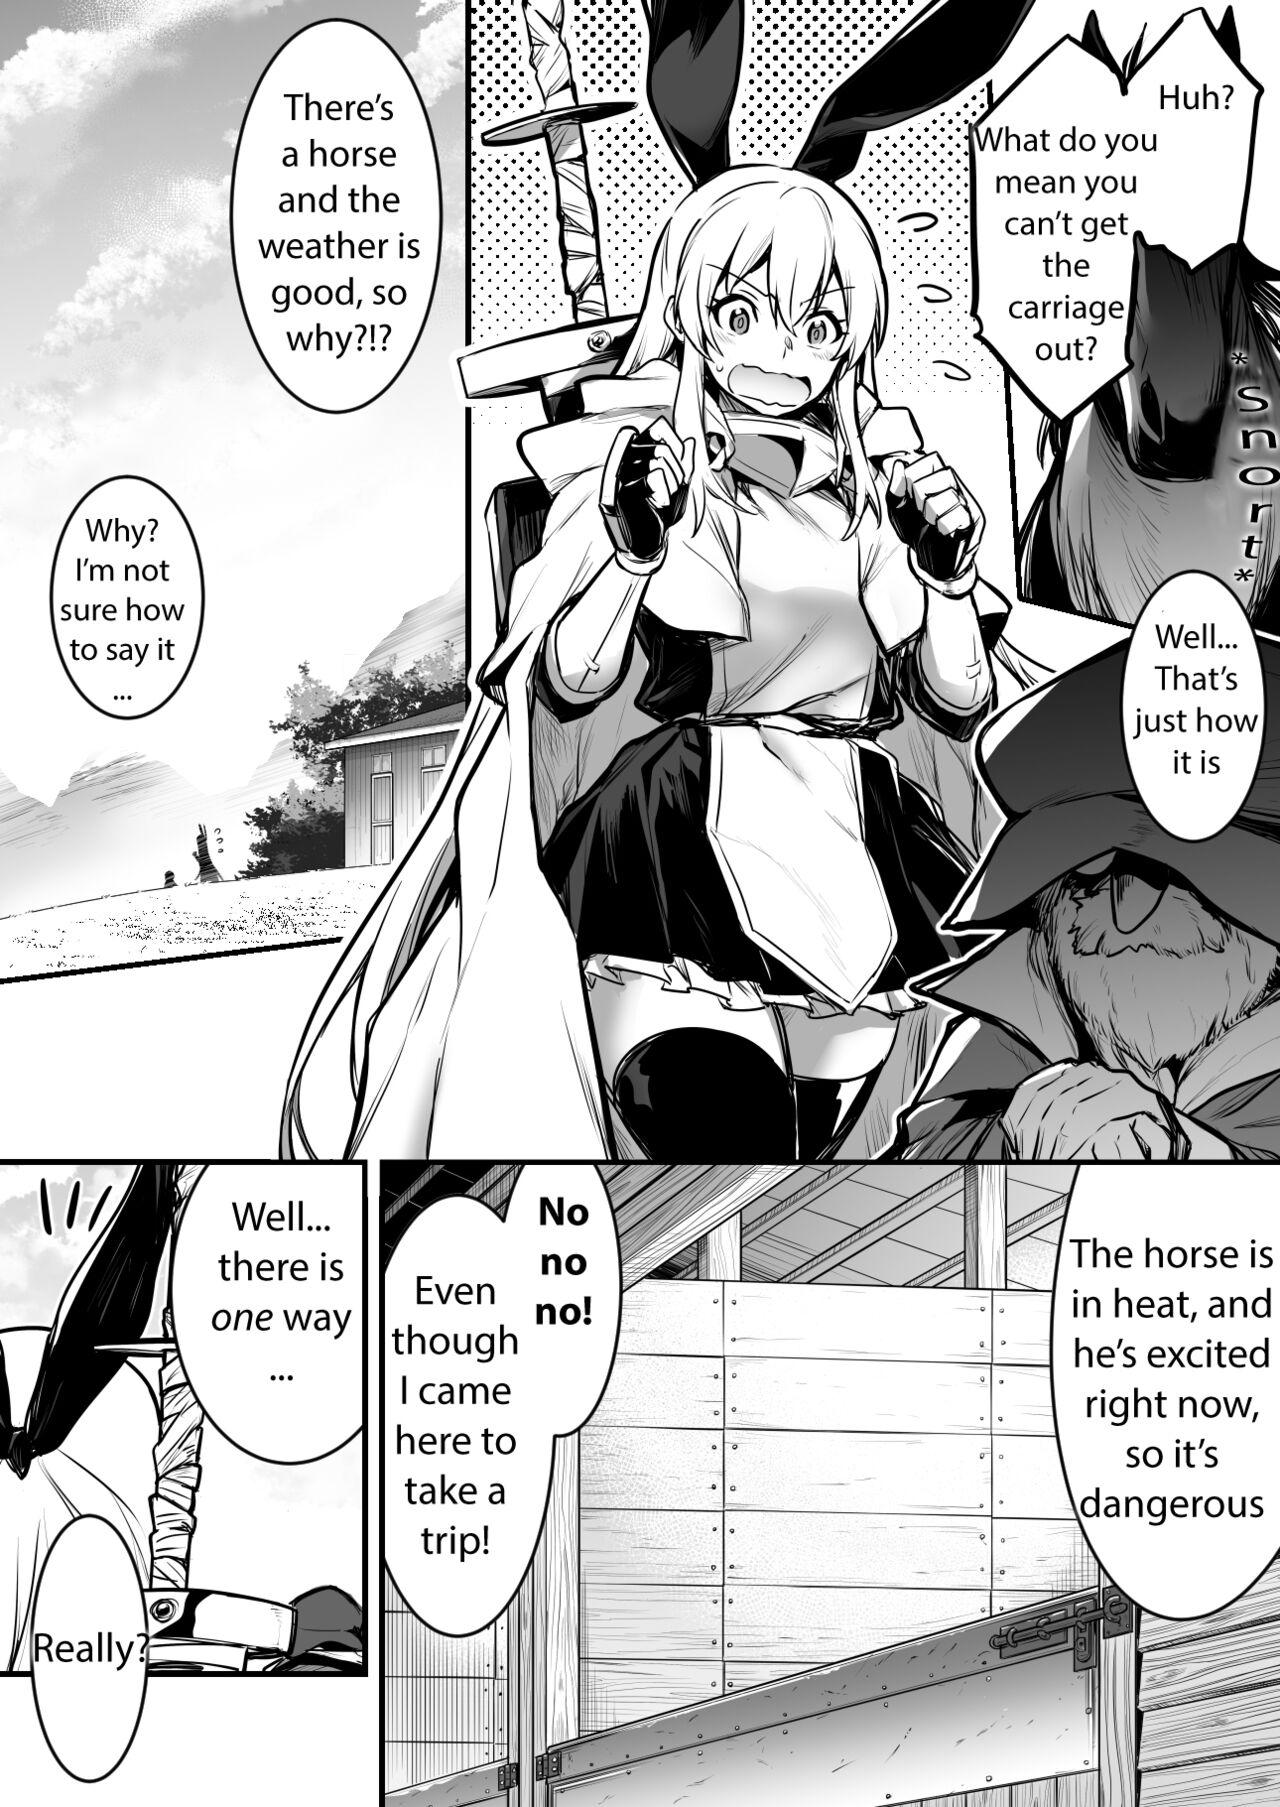 Adventure-chan helps the lustful horse cum so he'll carry her away 1